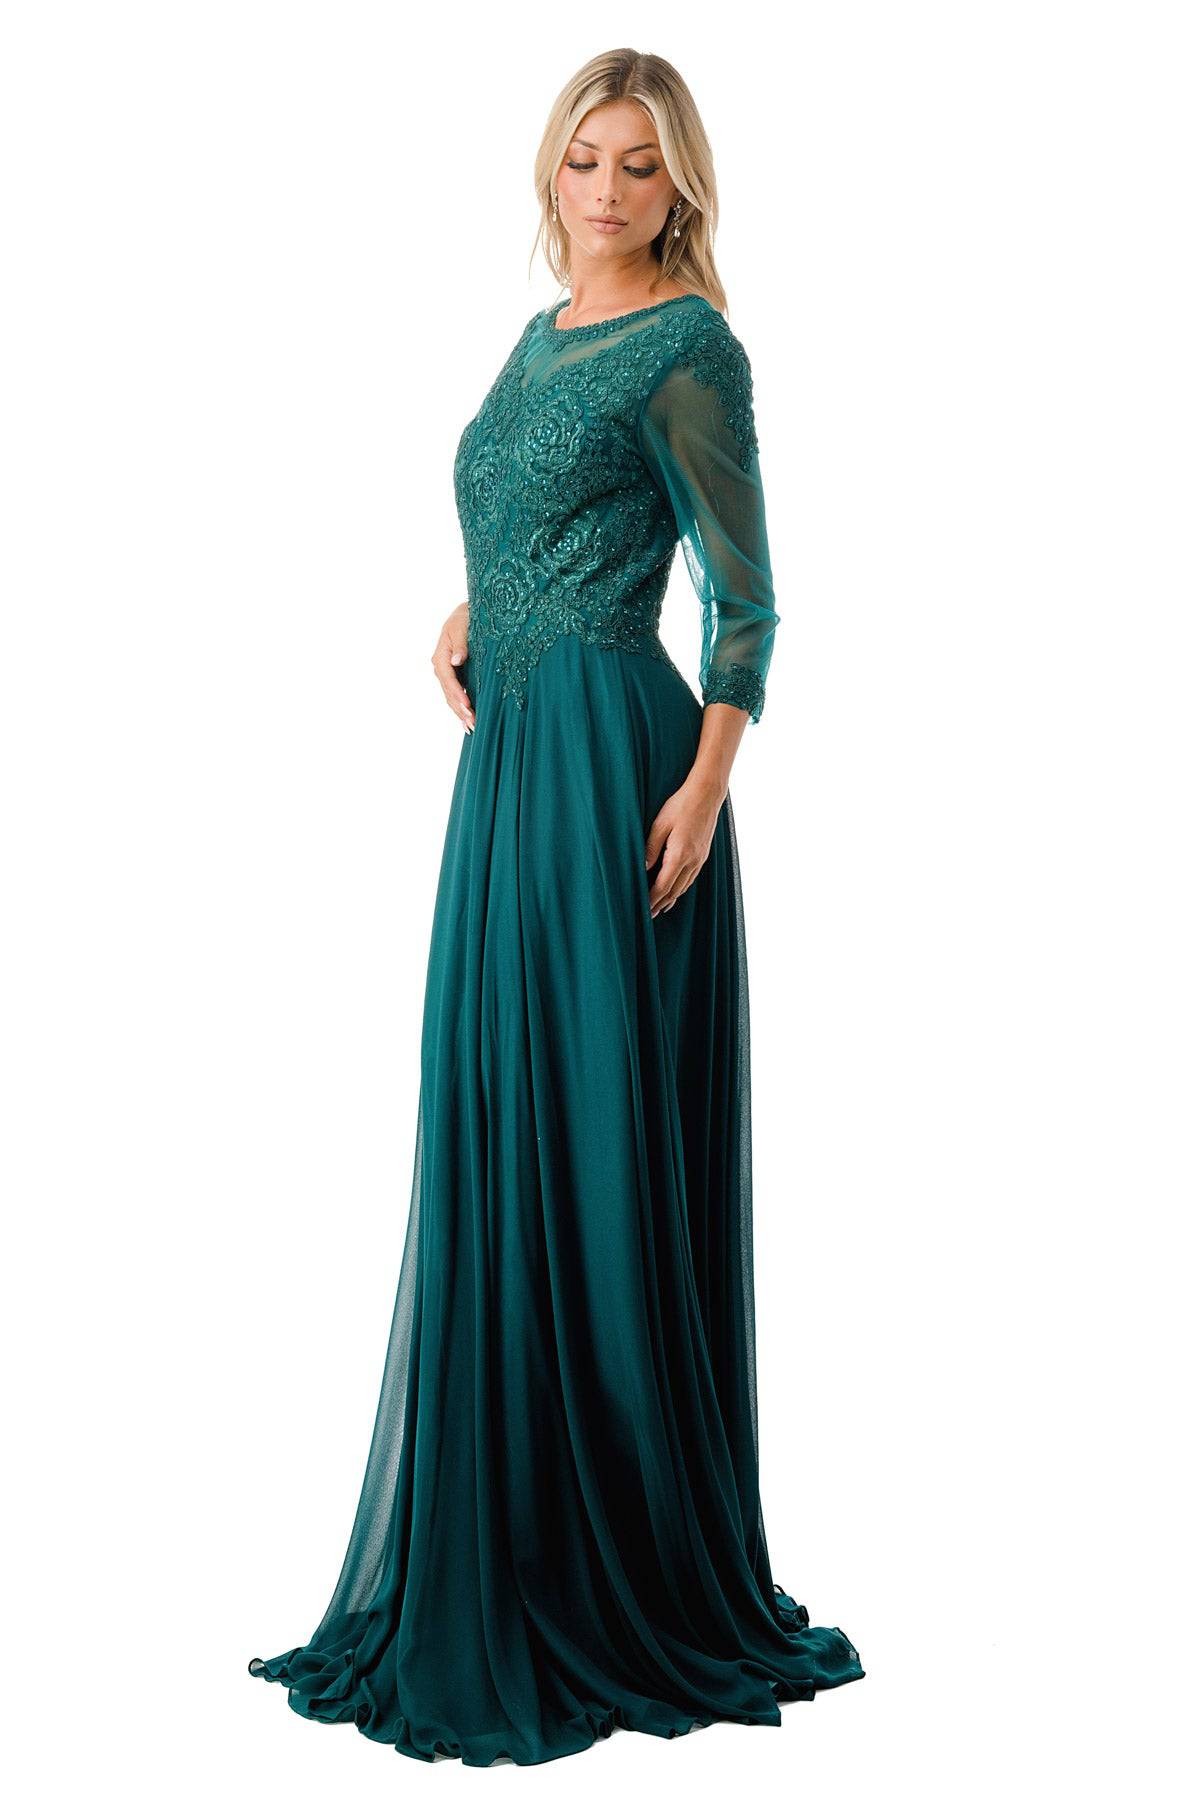 Aspeed M2723J Lace Embroidered 3/4 Sleeve Chiffon Dress - NORMA REED